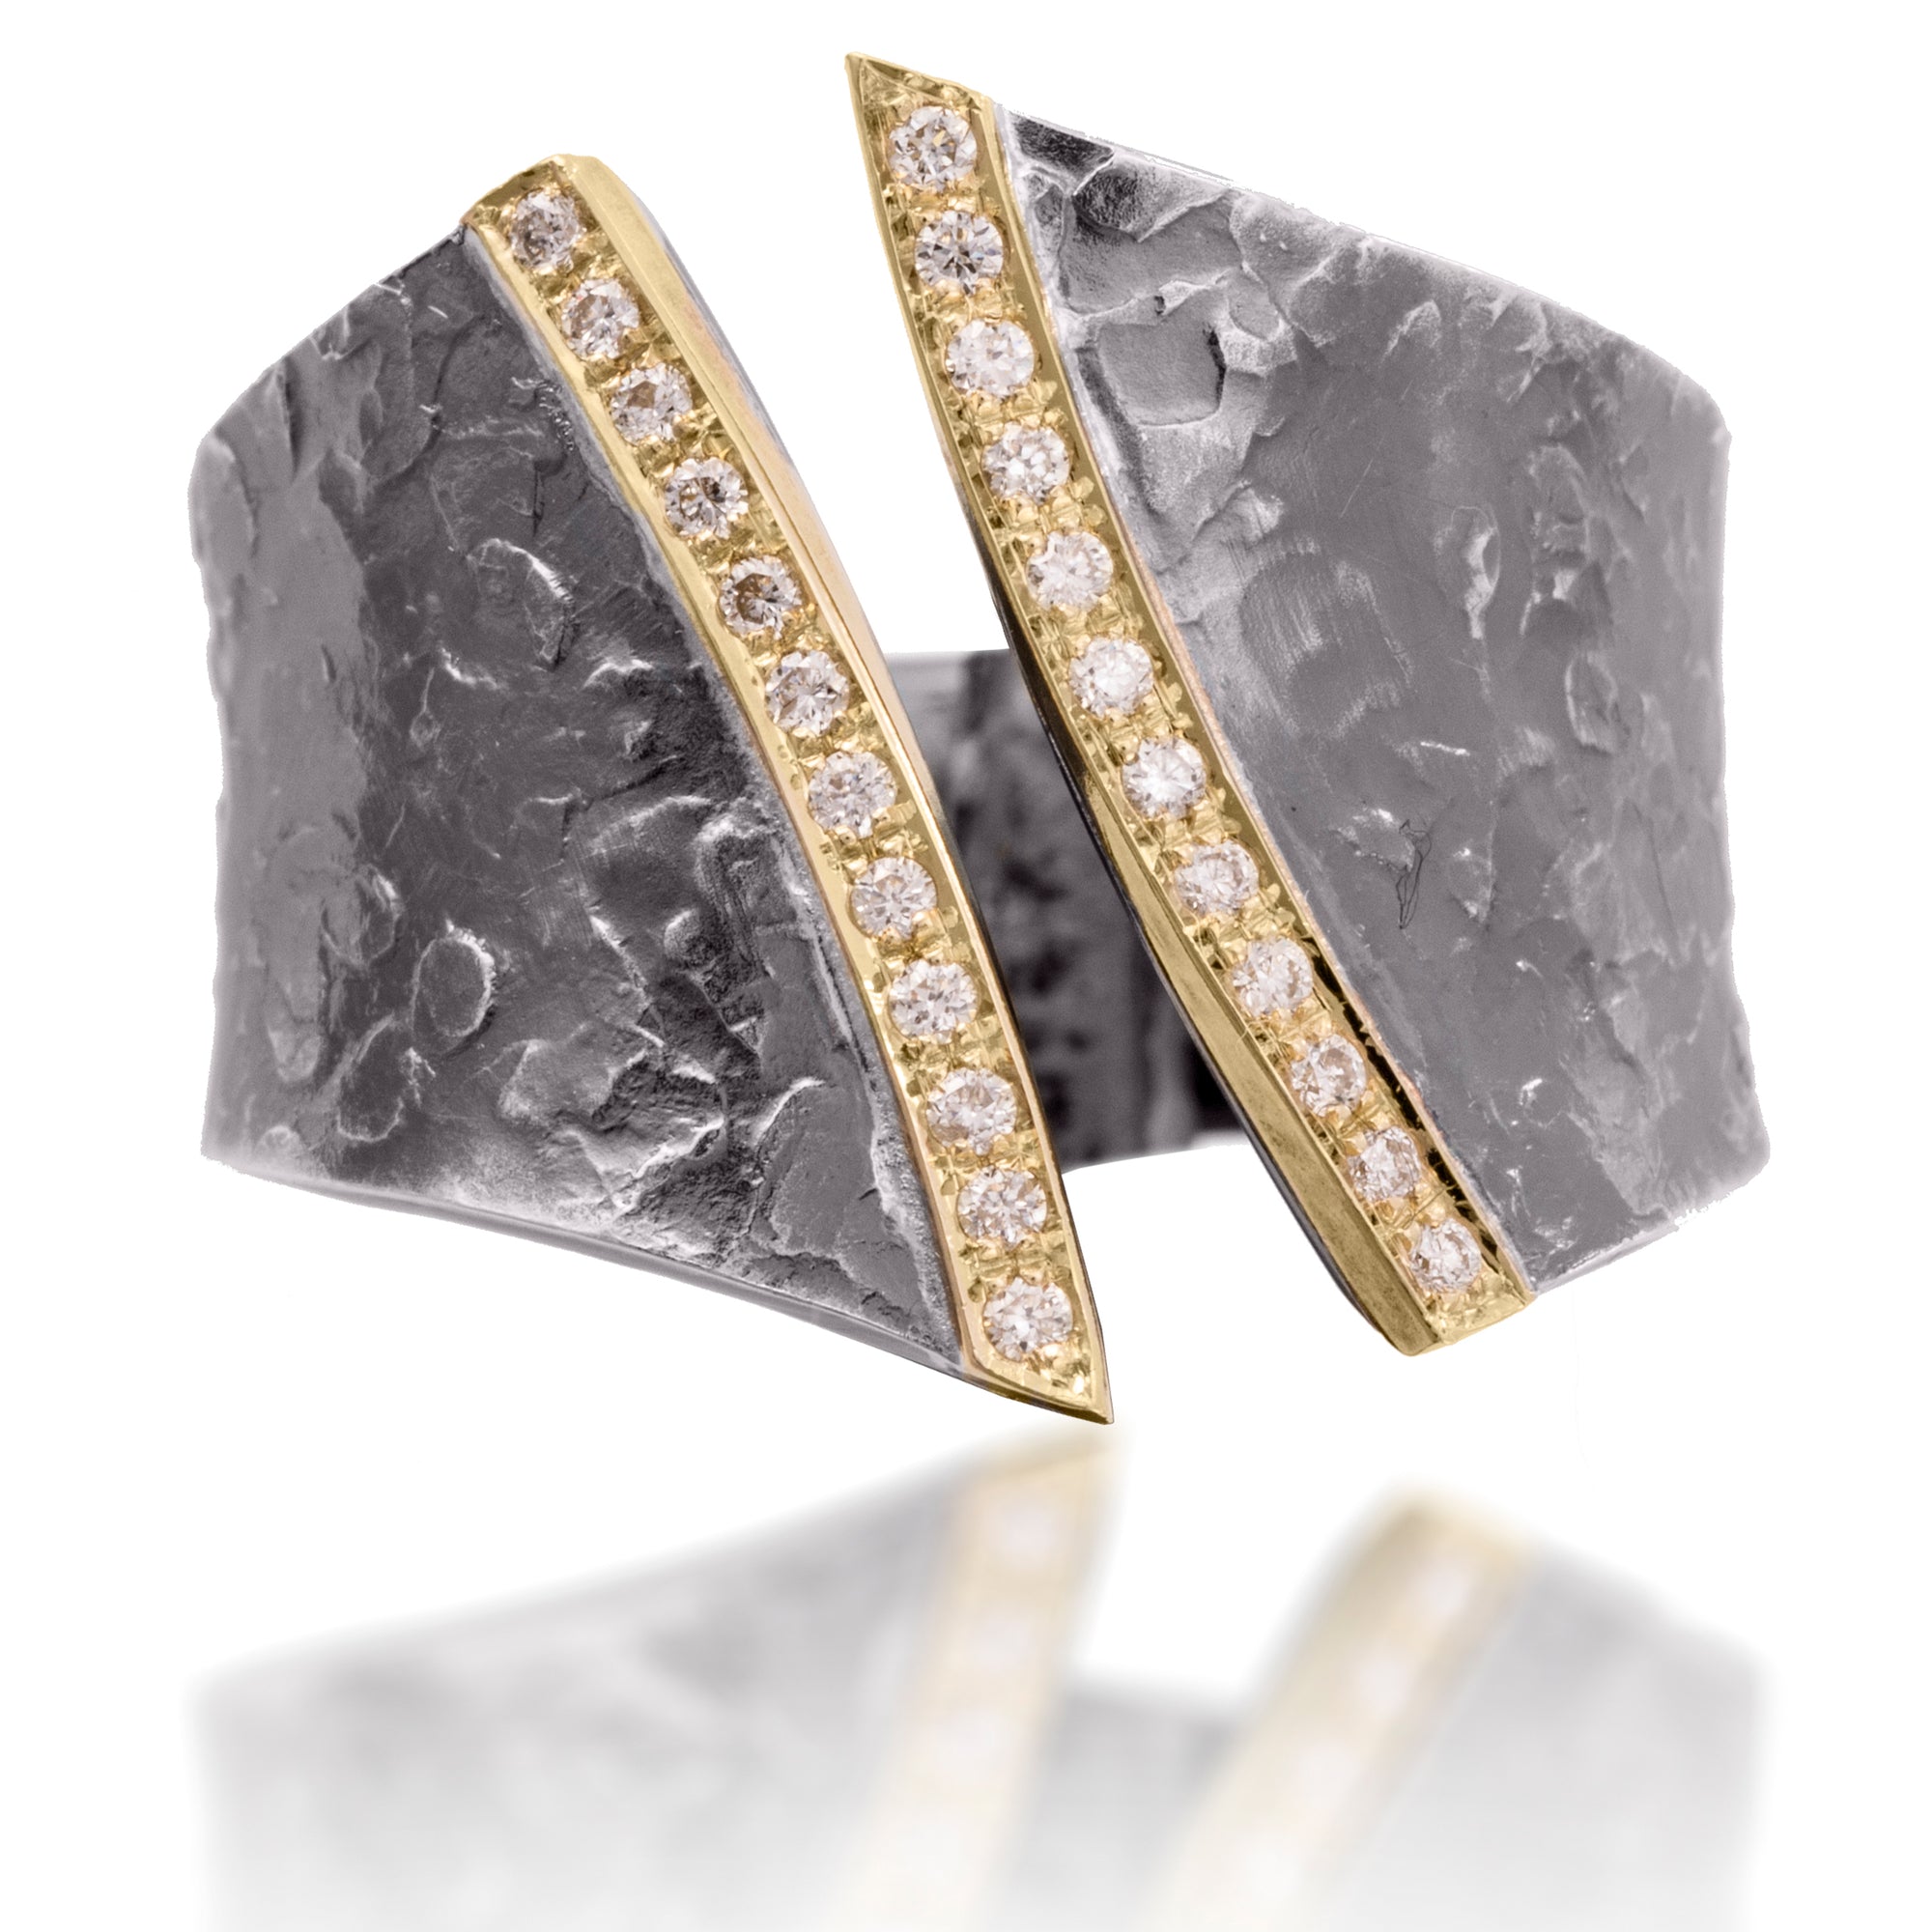 A fresh, modern classic combining earthy textured metals with true bright cut pavé. Hand forged and fabricated in 18k gold and oxidized sterling silver with pavé set white diamonds. As shown, 0.166 tcw.